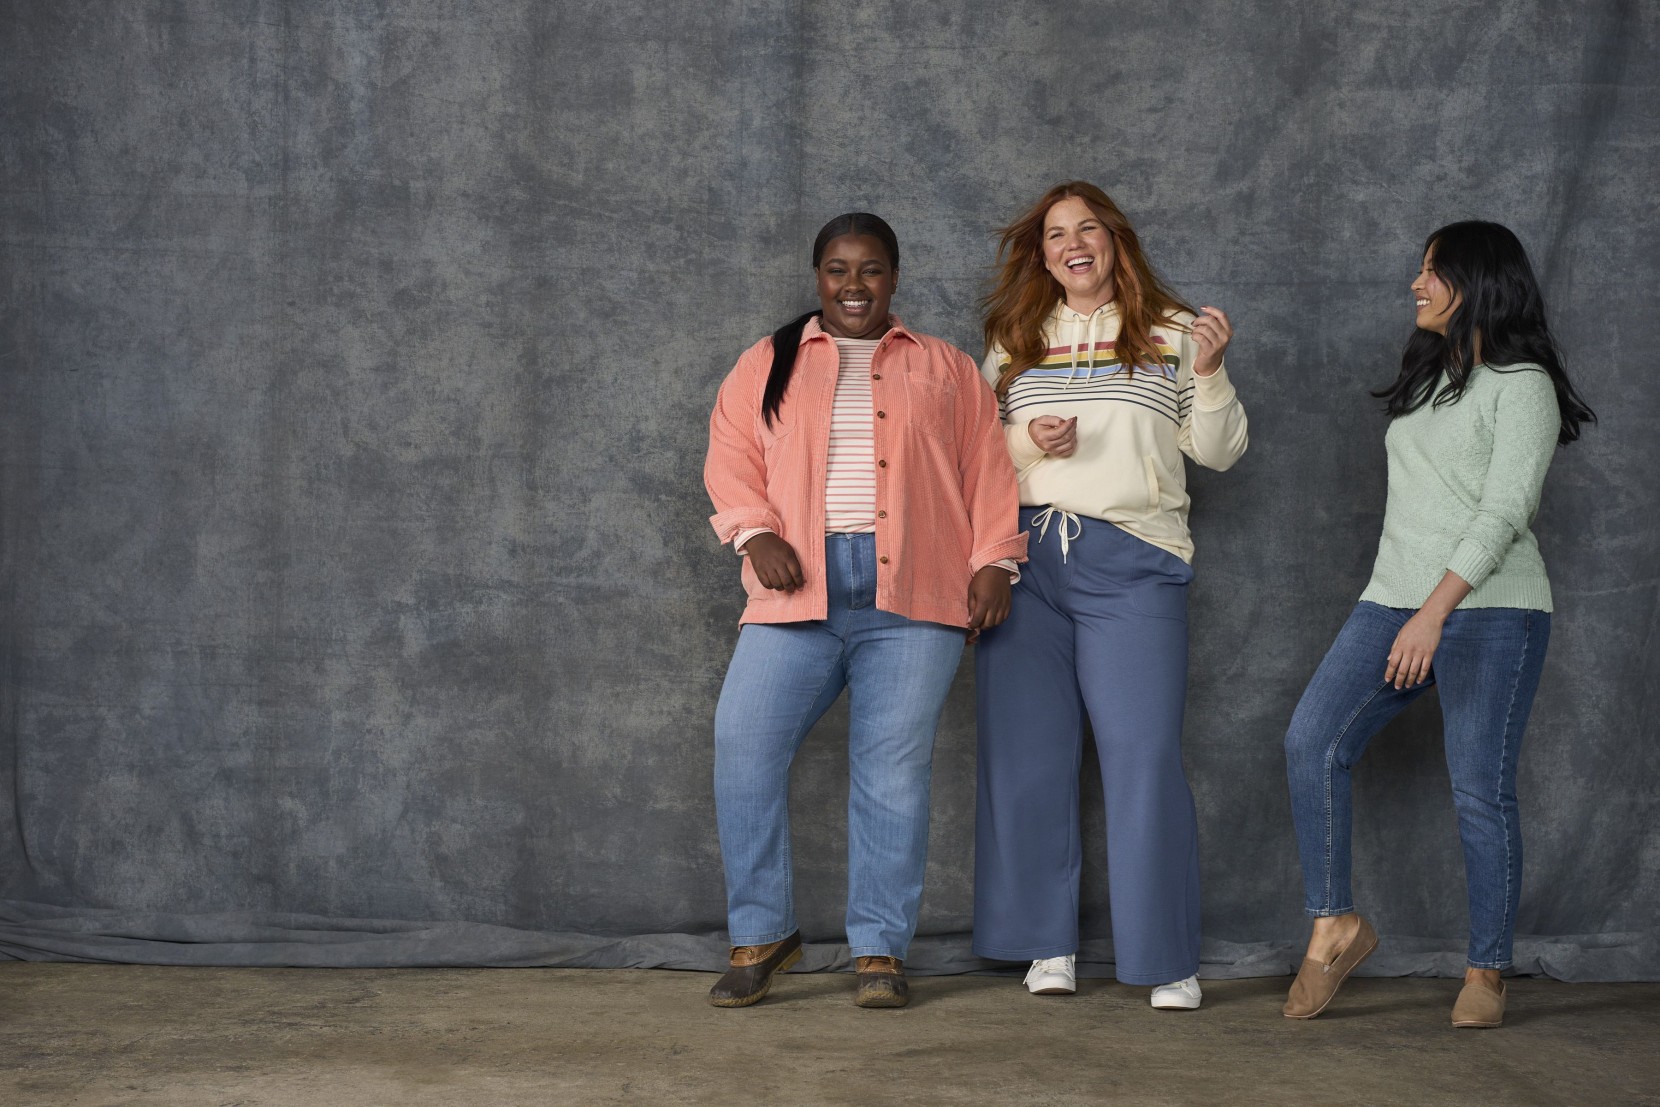 New styles in inclusive sizes